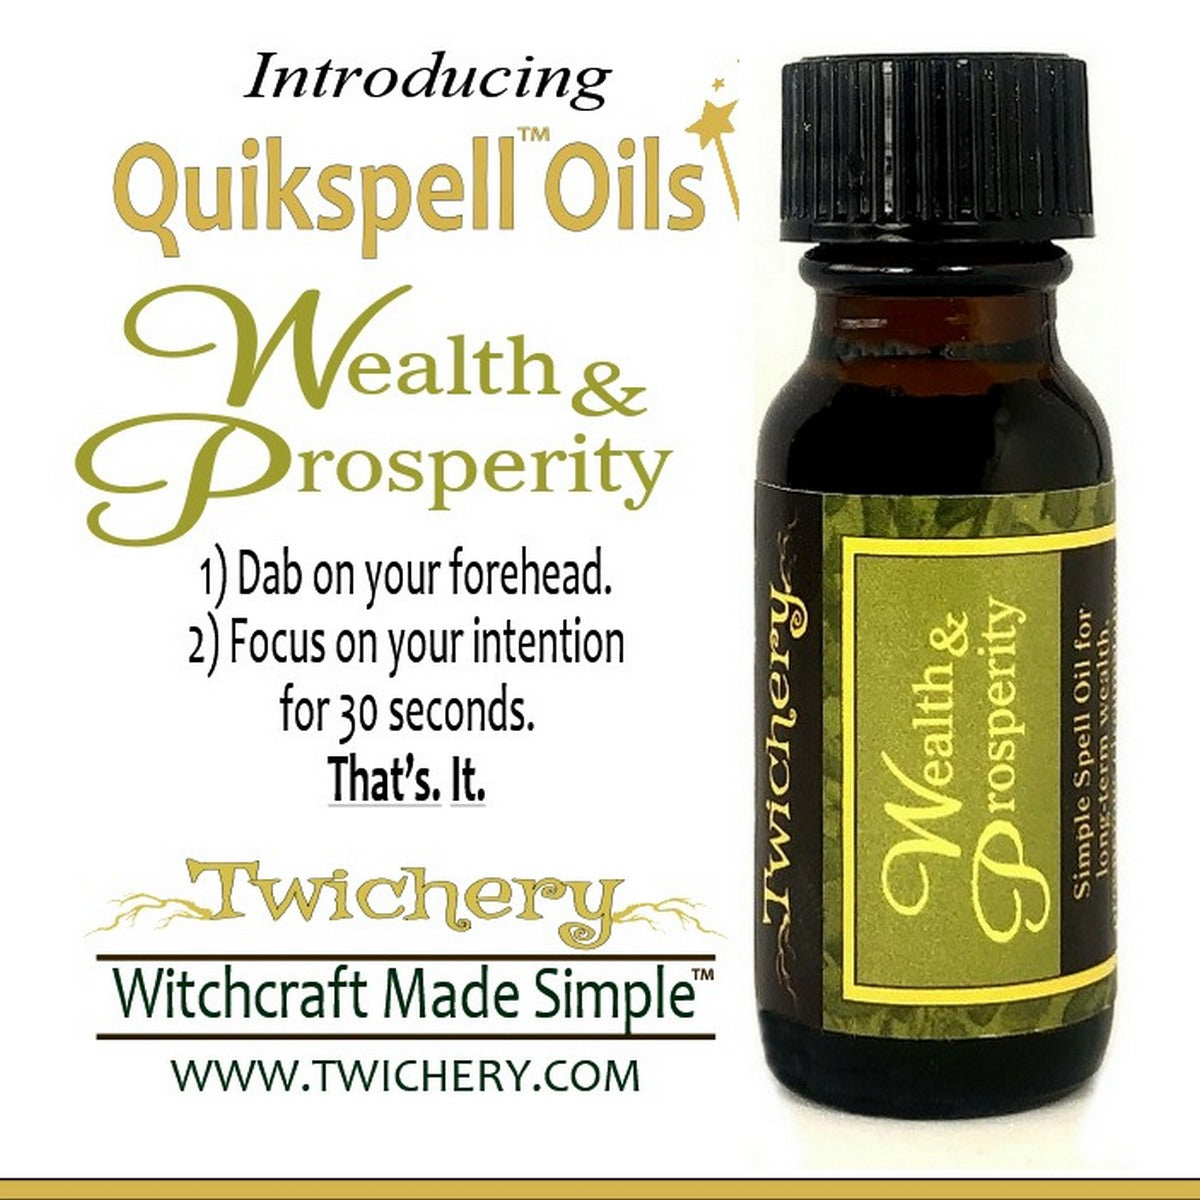 Twichery Wealth & Prosperity Quikspell Oil is your one-step magickal process for long-term wealth & prosperity, Hoodoo, Voodoo, Wicca, Pagan, Witchcraft Made Simple